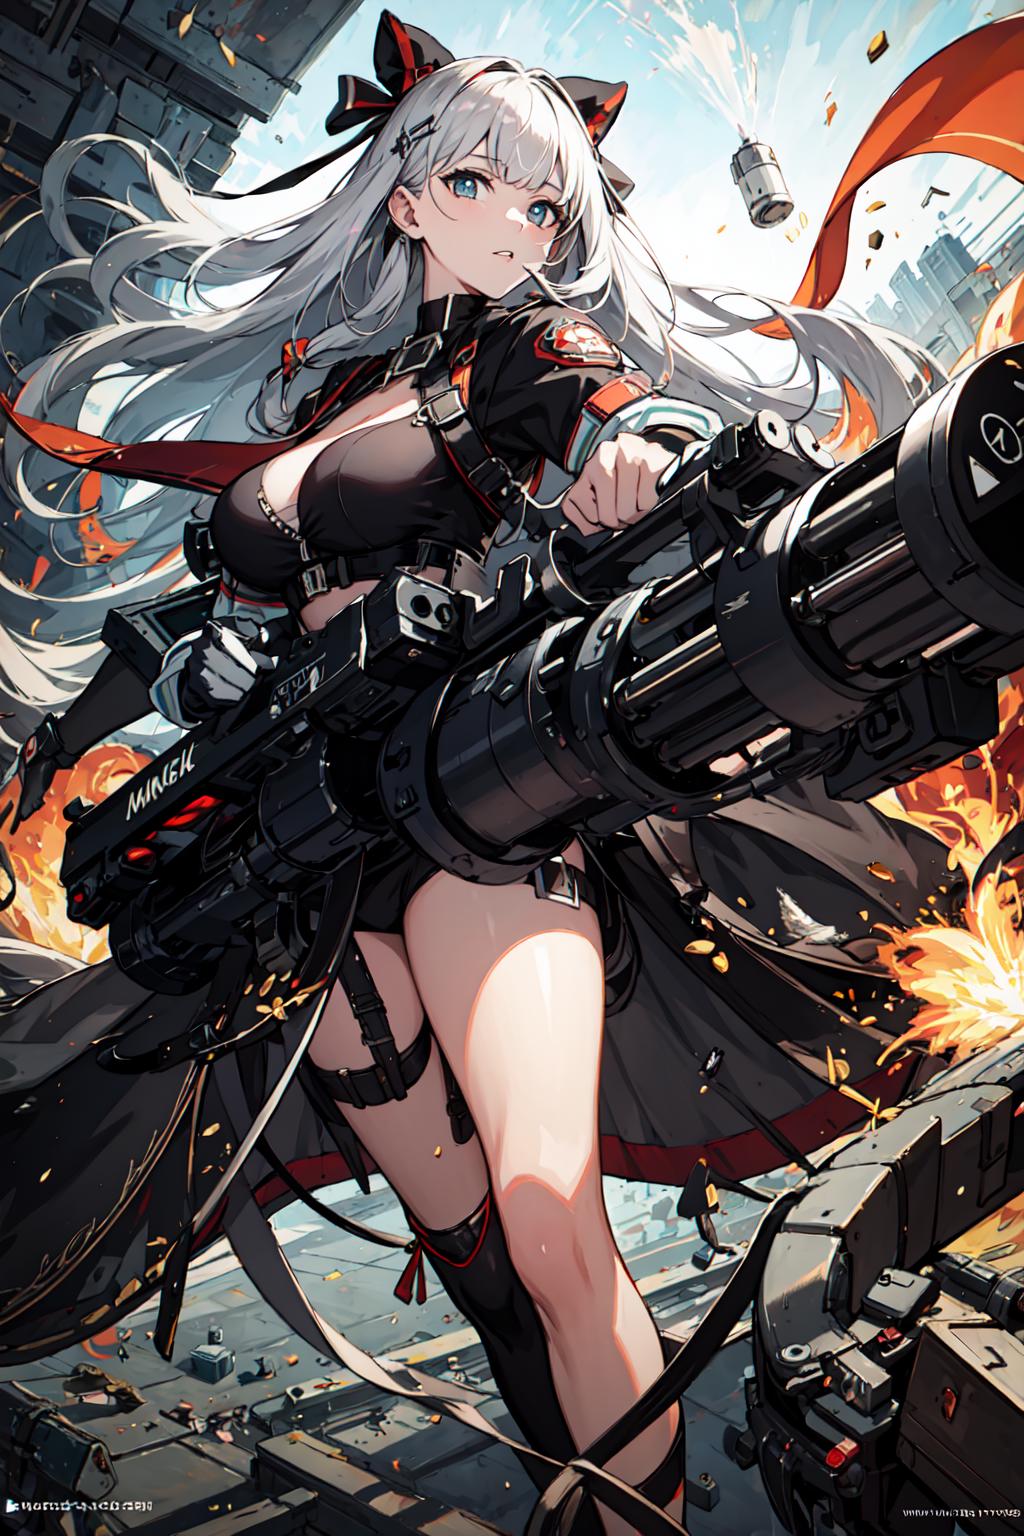 A fantasy anime girl holding a giant gun in her hand.